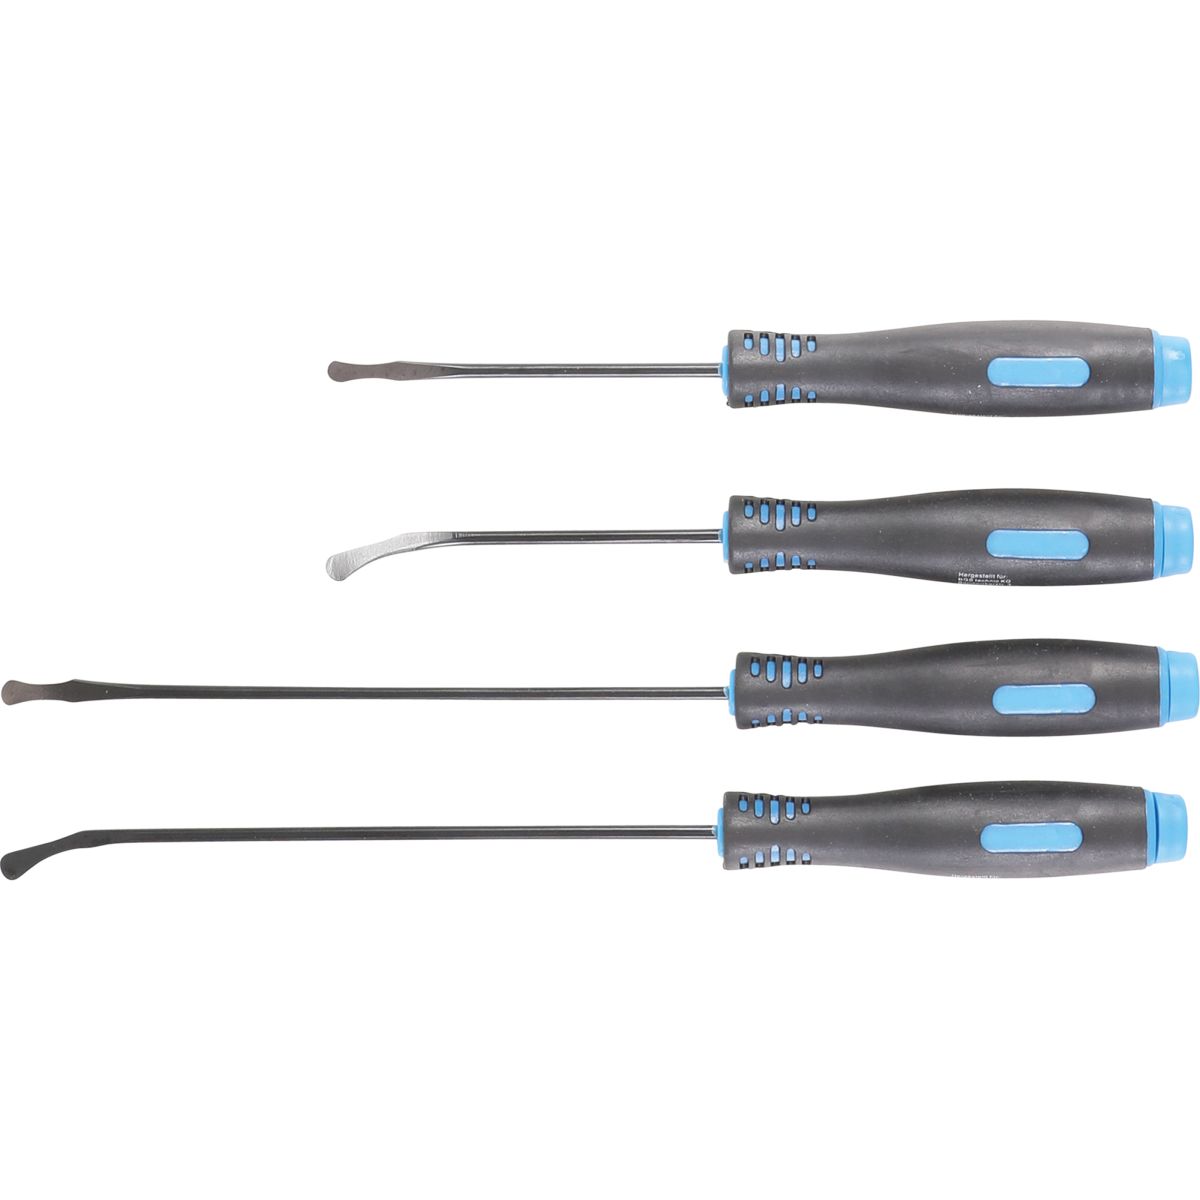 Hook Set with rounded tips | 4 pcs.